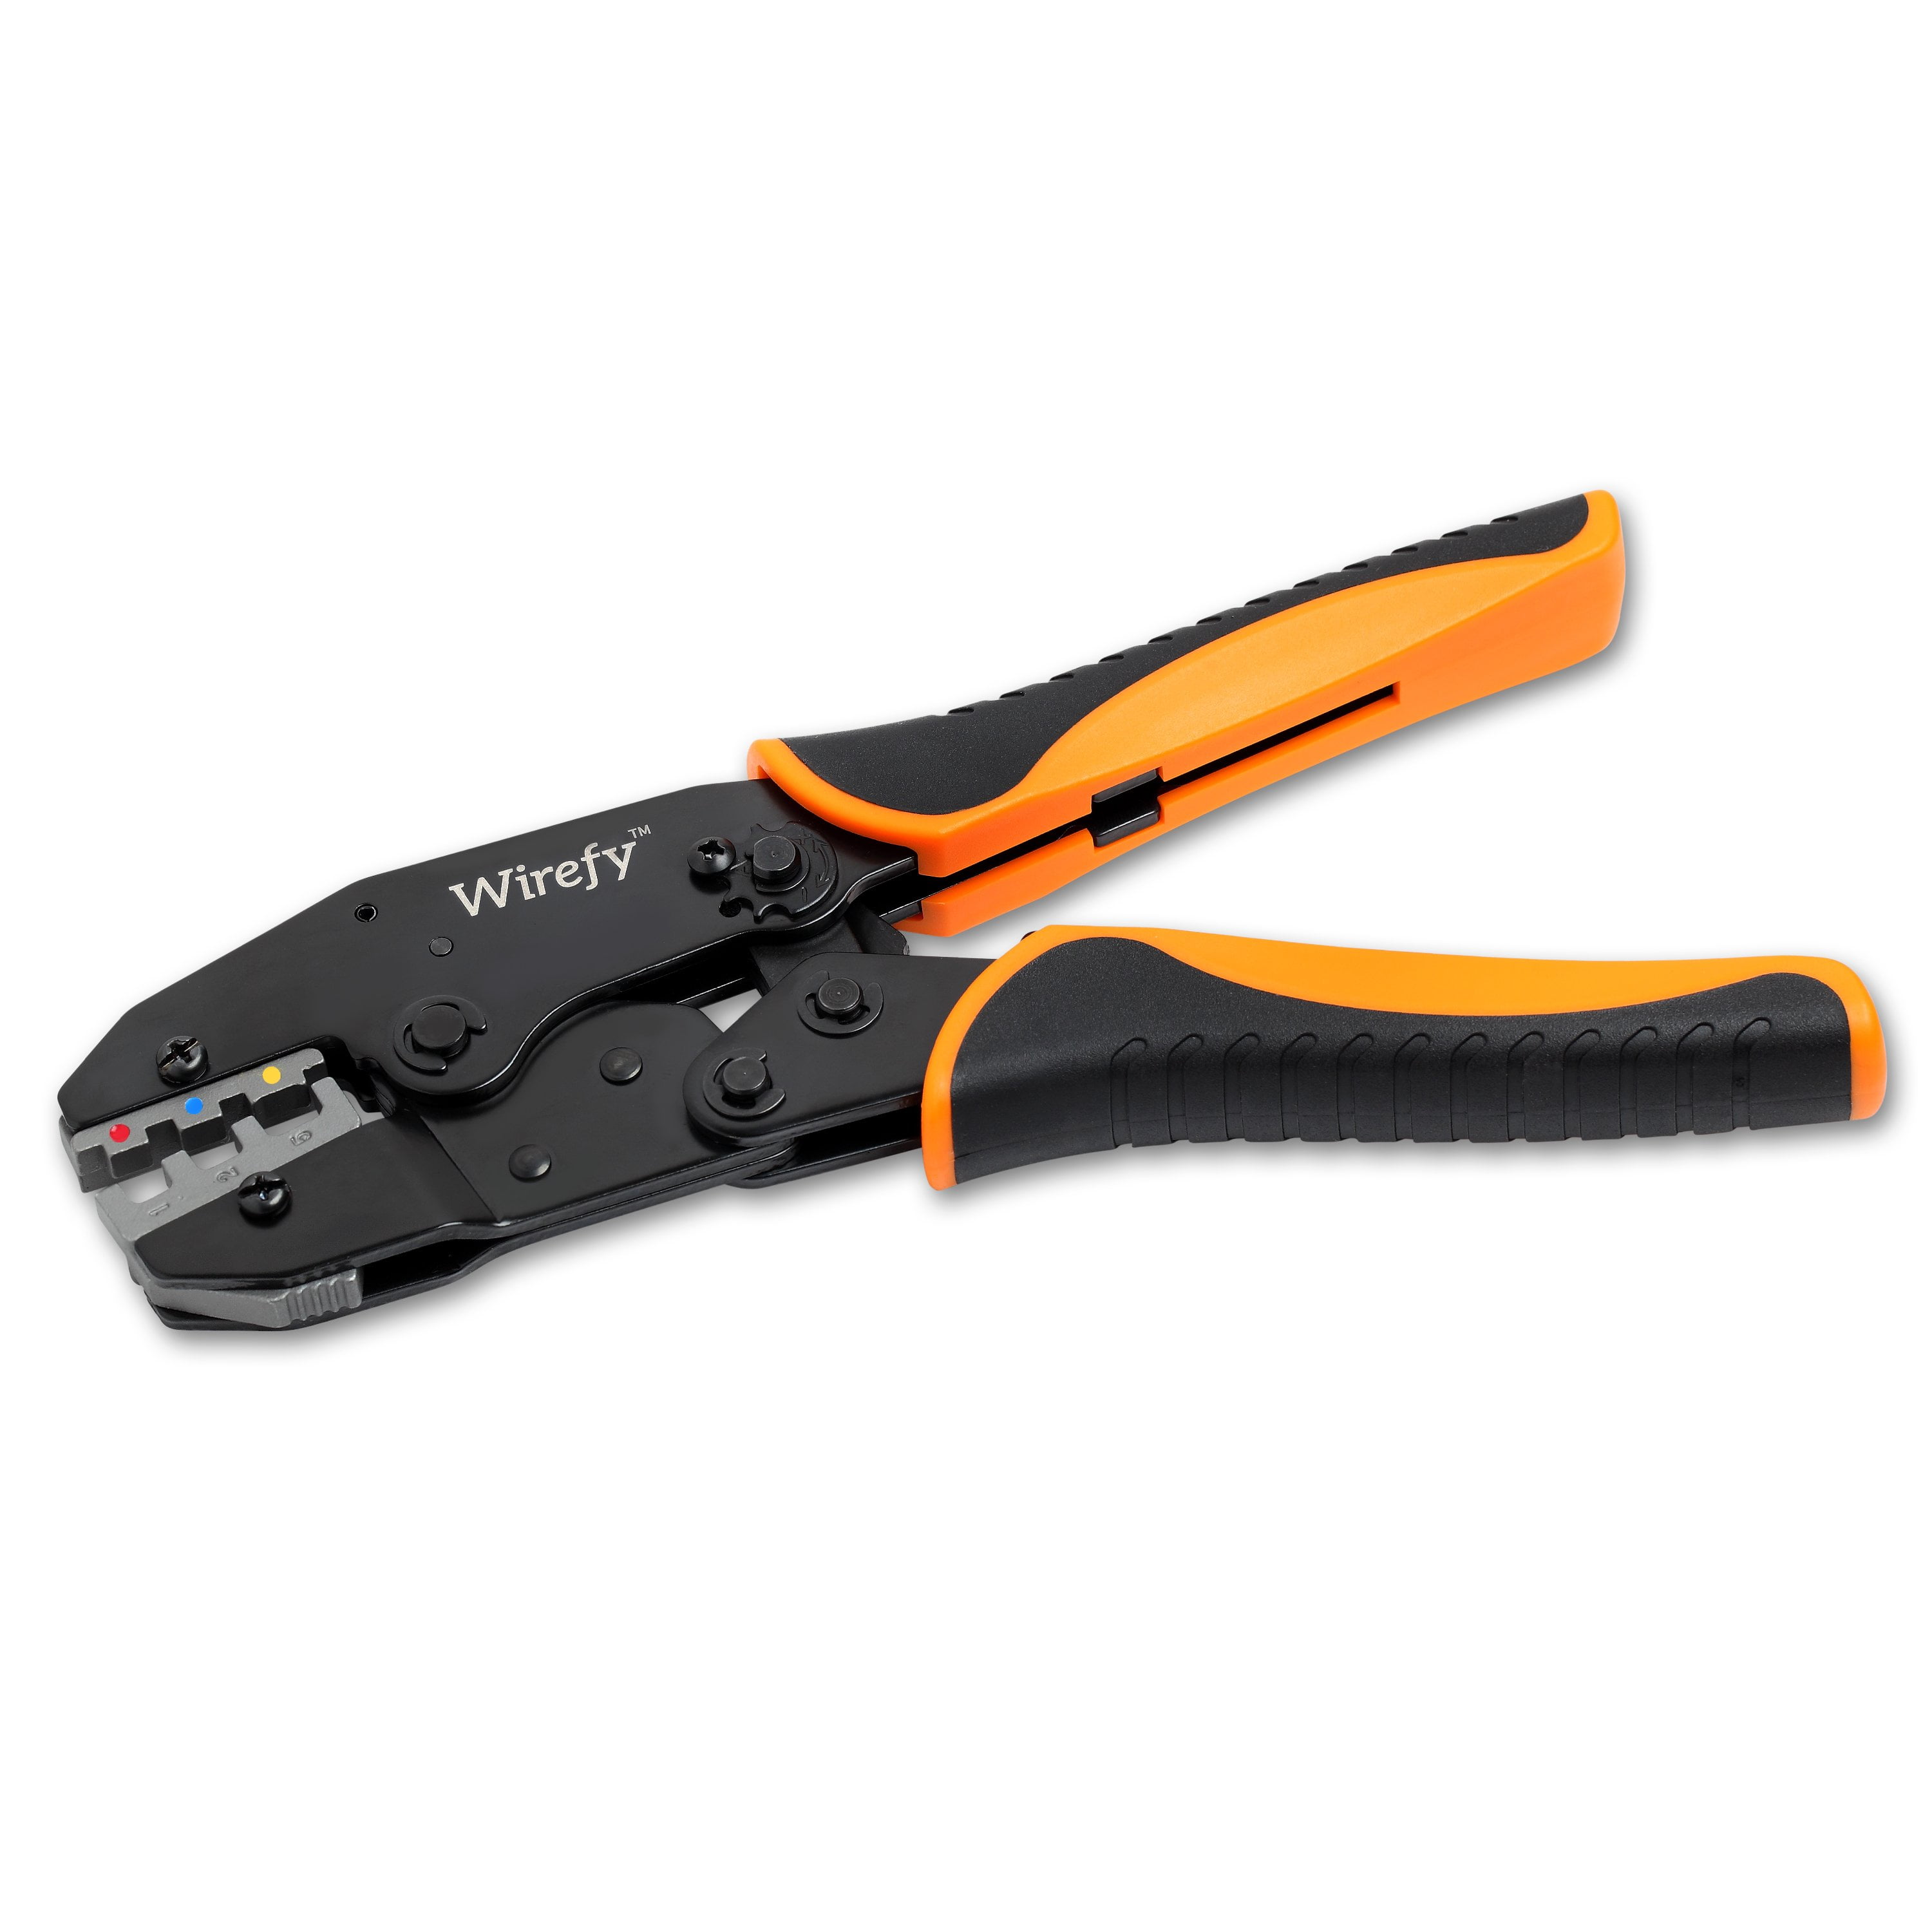 The Perfect Crimp With Wirefy's Insulated Nylon Connector Crimper –  Wirefyshop